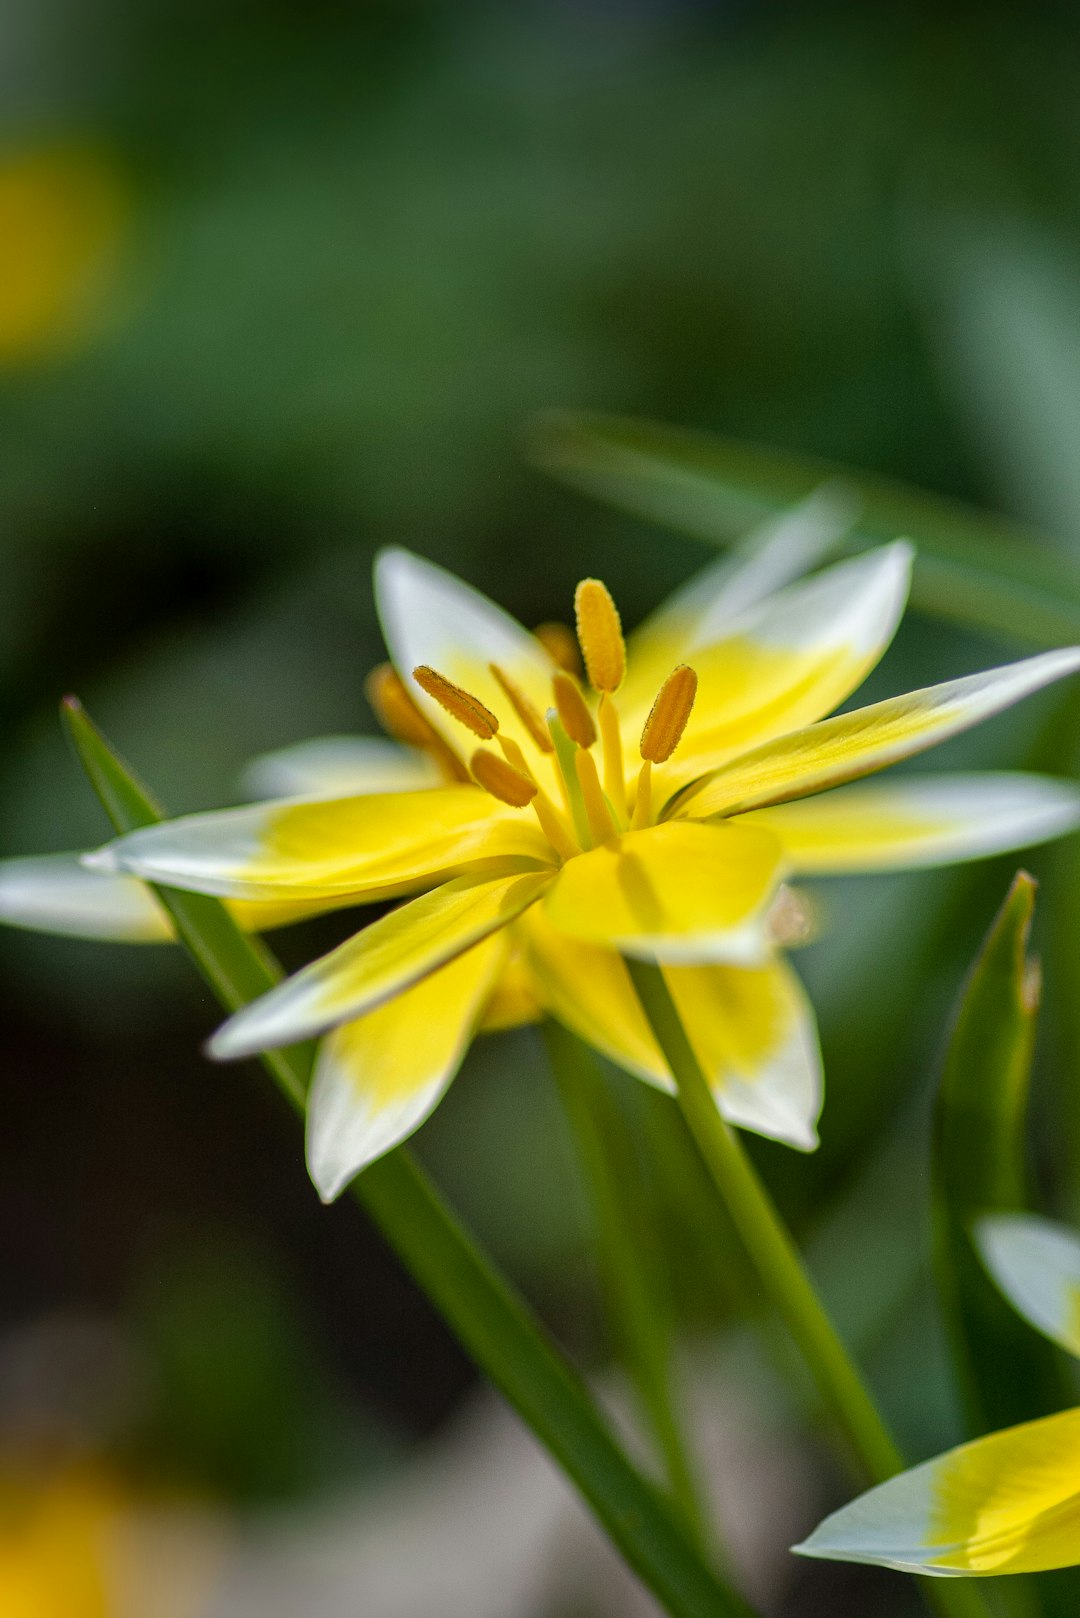 yellow and white petaled flower close-up photography